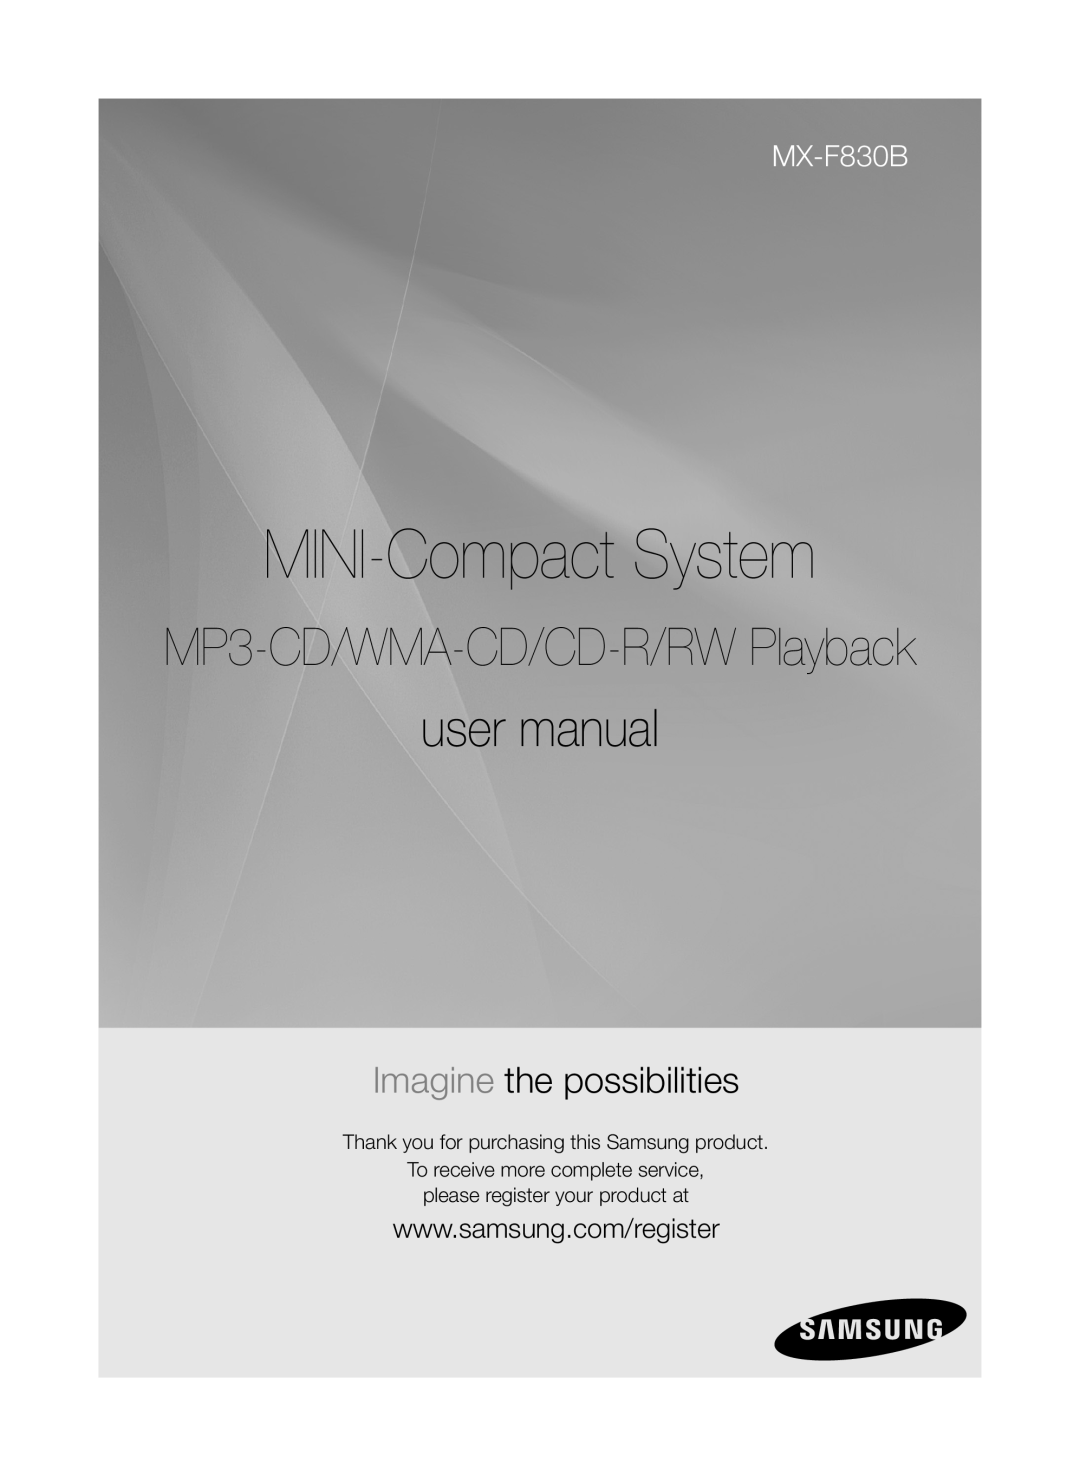 Samsung MXF830BZA user manual Thank you for purchasing this Samsung product, MINI-Compact System, MX-F830B 